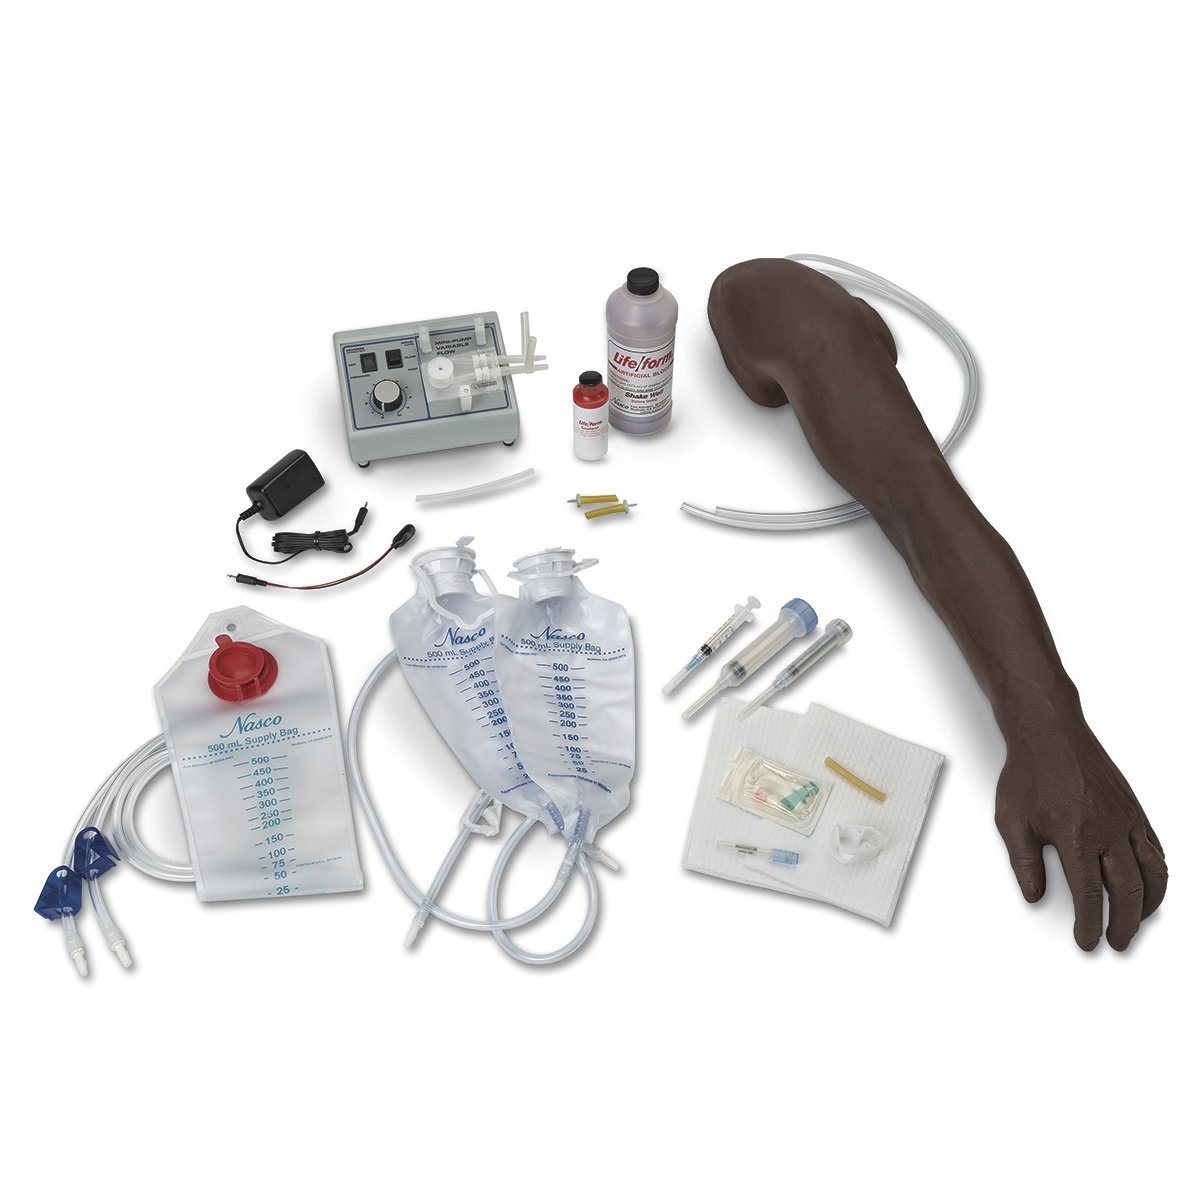 Life/form Advanced Venipuncture and Injection Arm with IV Arm Circulation Pump - Dark Arm